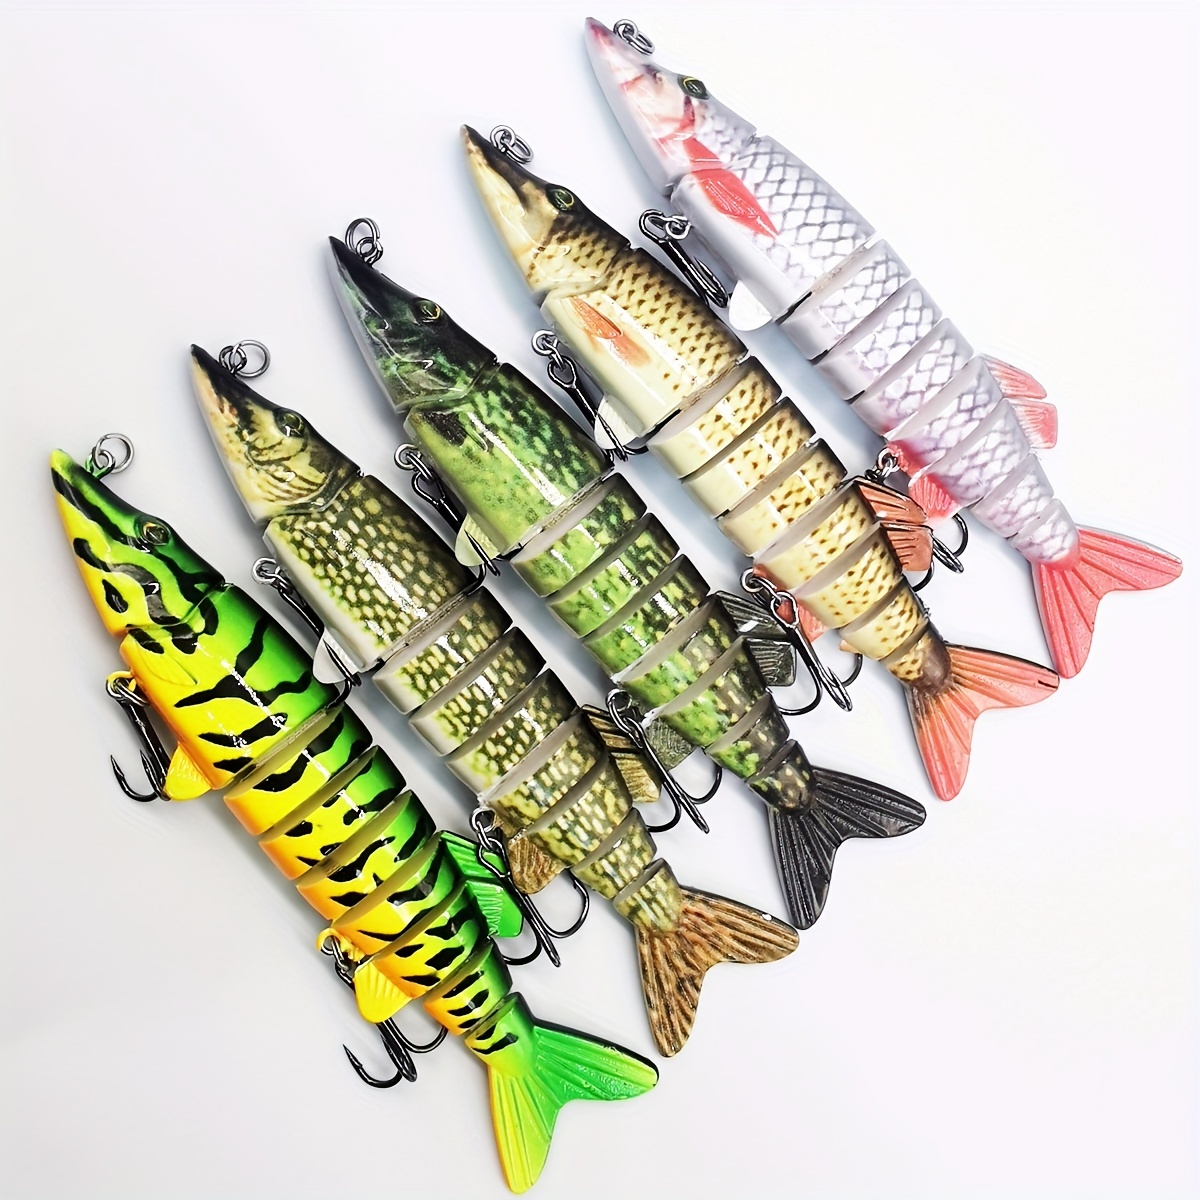 10 Pcs Soft Bionic Swimming Fishing Lures Loach Artificial Bait with  Rotating Spins Tail Slow Sinking Bass Swimbaits Simulation Saltwater  Freshwater Fake Baits for Pike Trout Mixed Color 5pcs